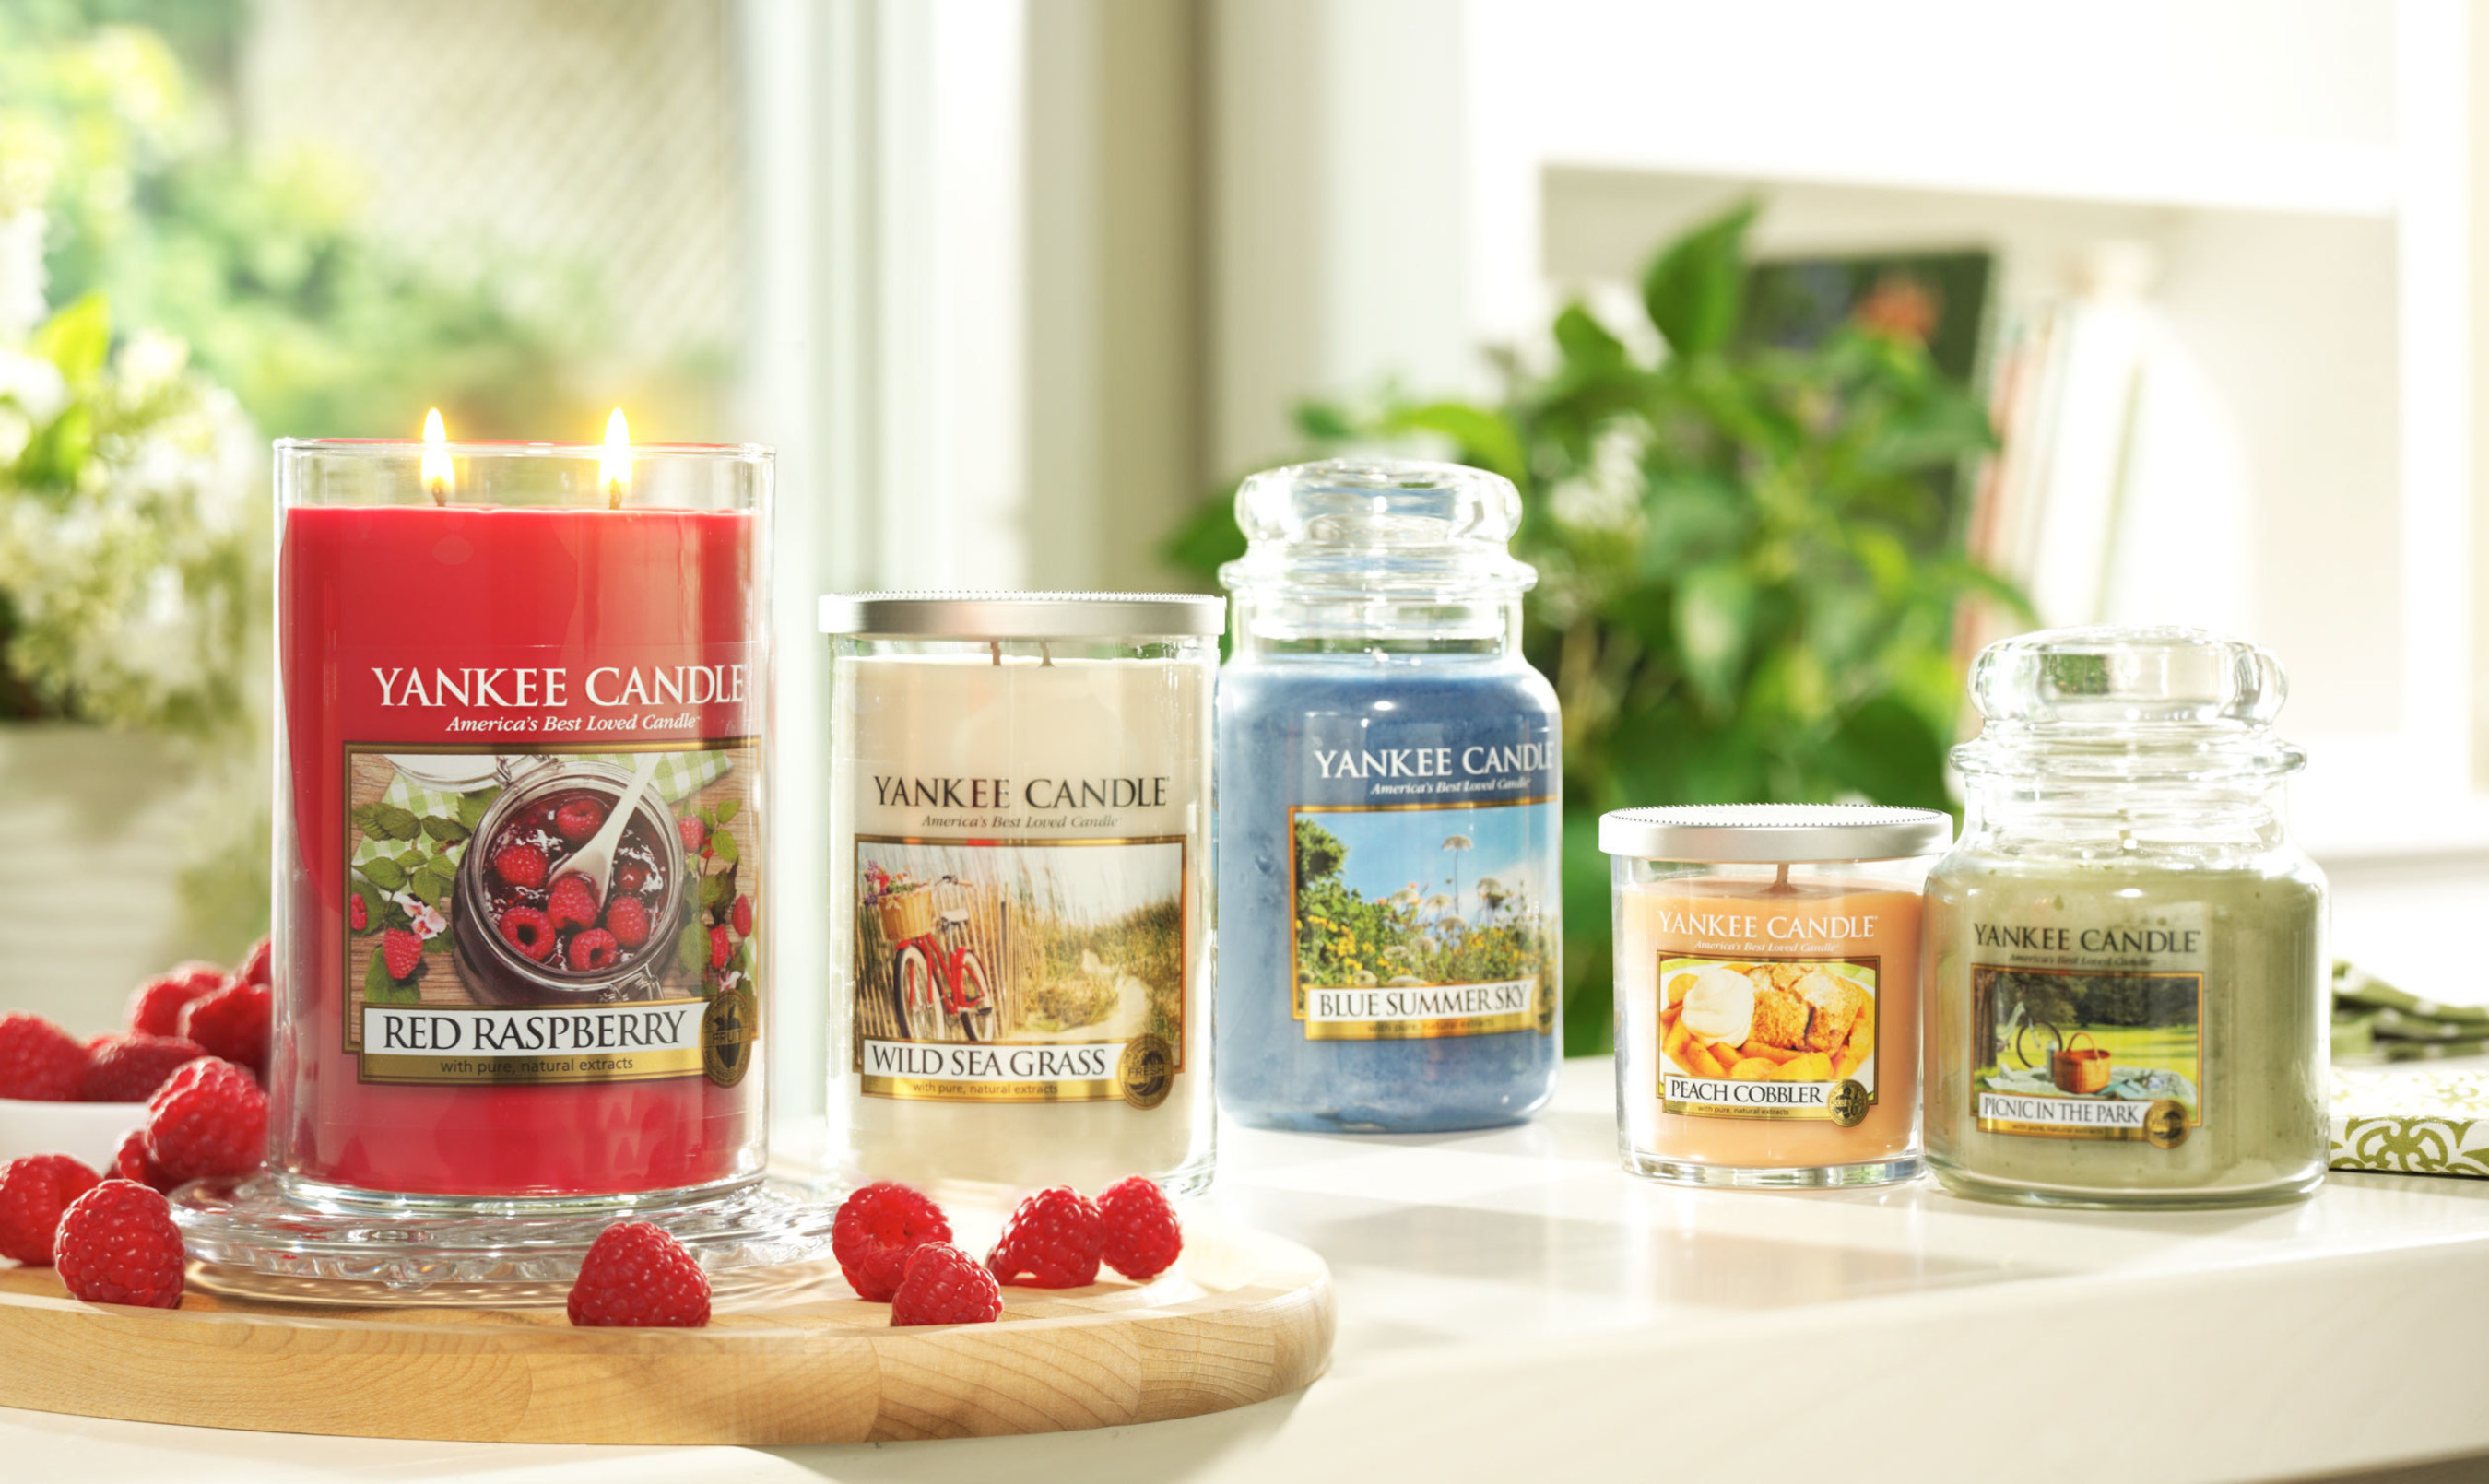 Introducing Yankee Candle's five new spring 2015 fragrances in its classic jar form.